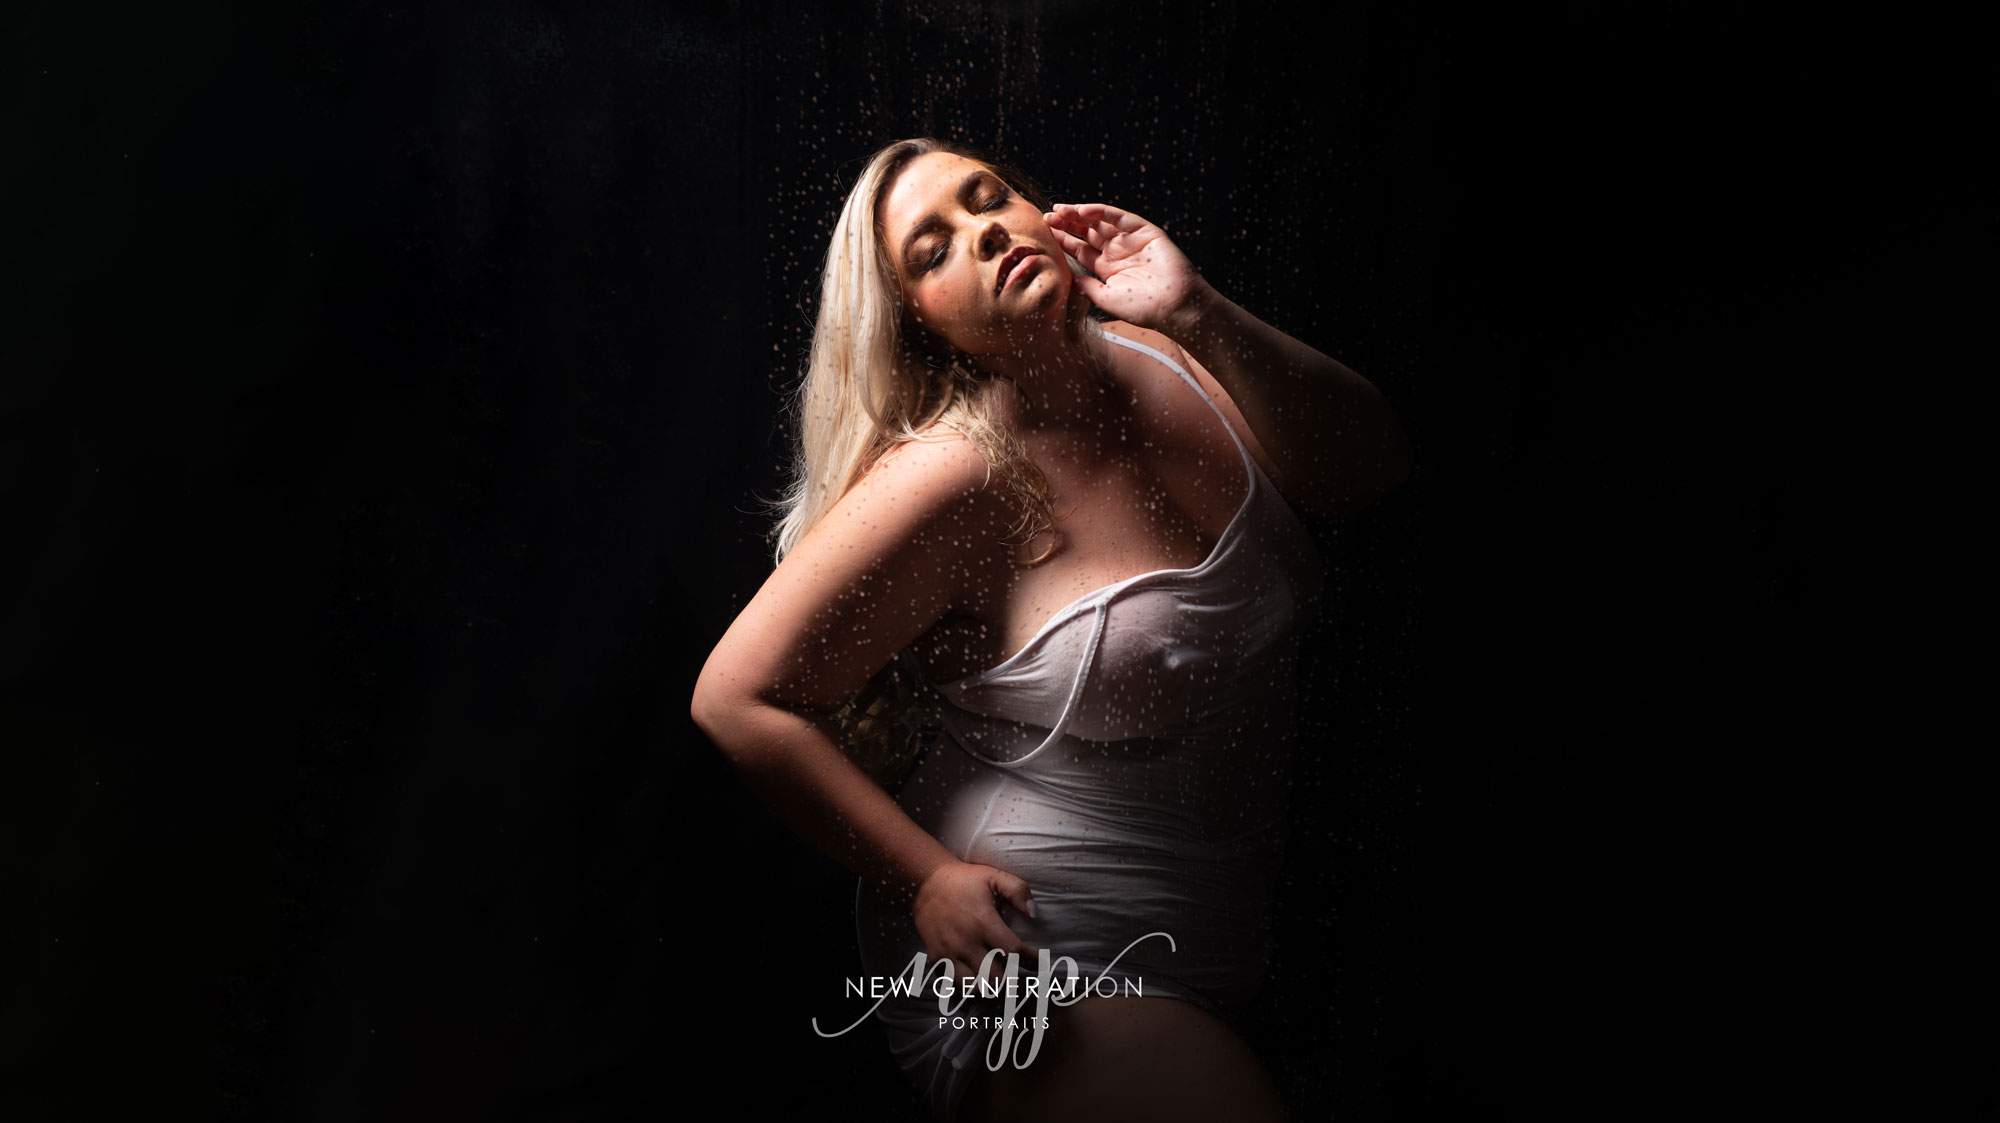 Lady in white dress in shower for boudoir shoot. Captured by New Generation Portraits